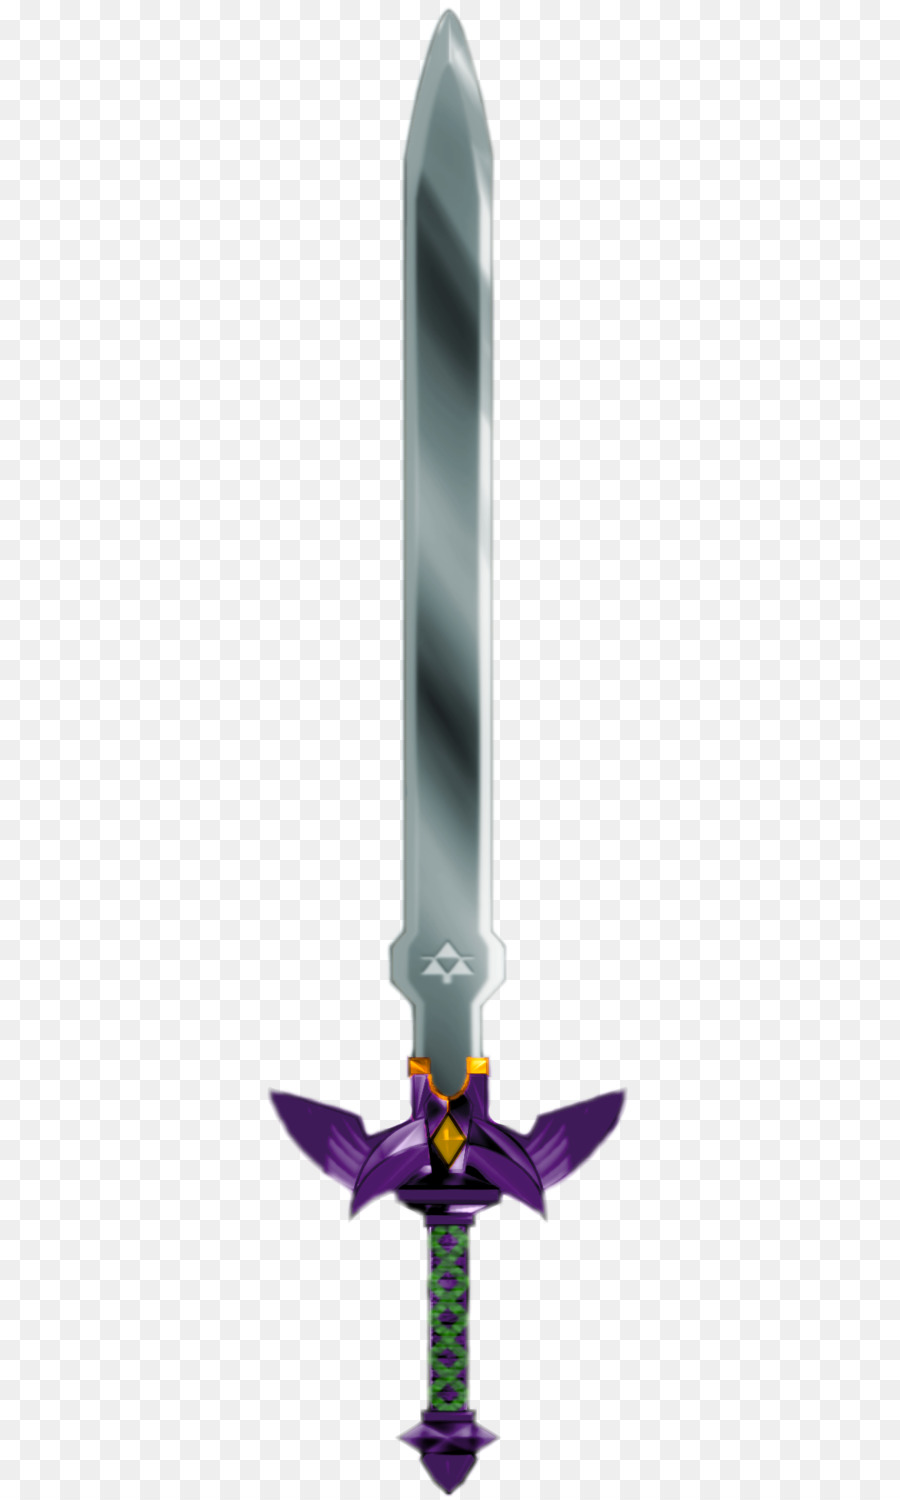 Master Sword The Legend of Zelda: Breath of the Wild Drawing - white shading png download - 900*1500 - Free Transparent Sword png Download.